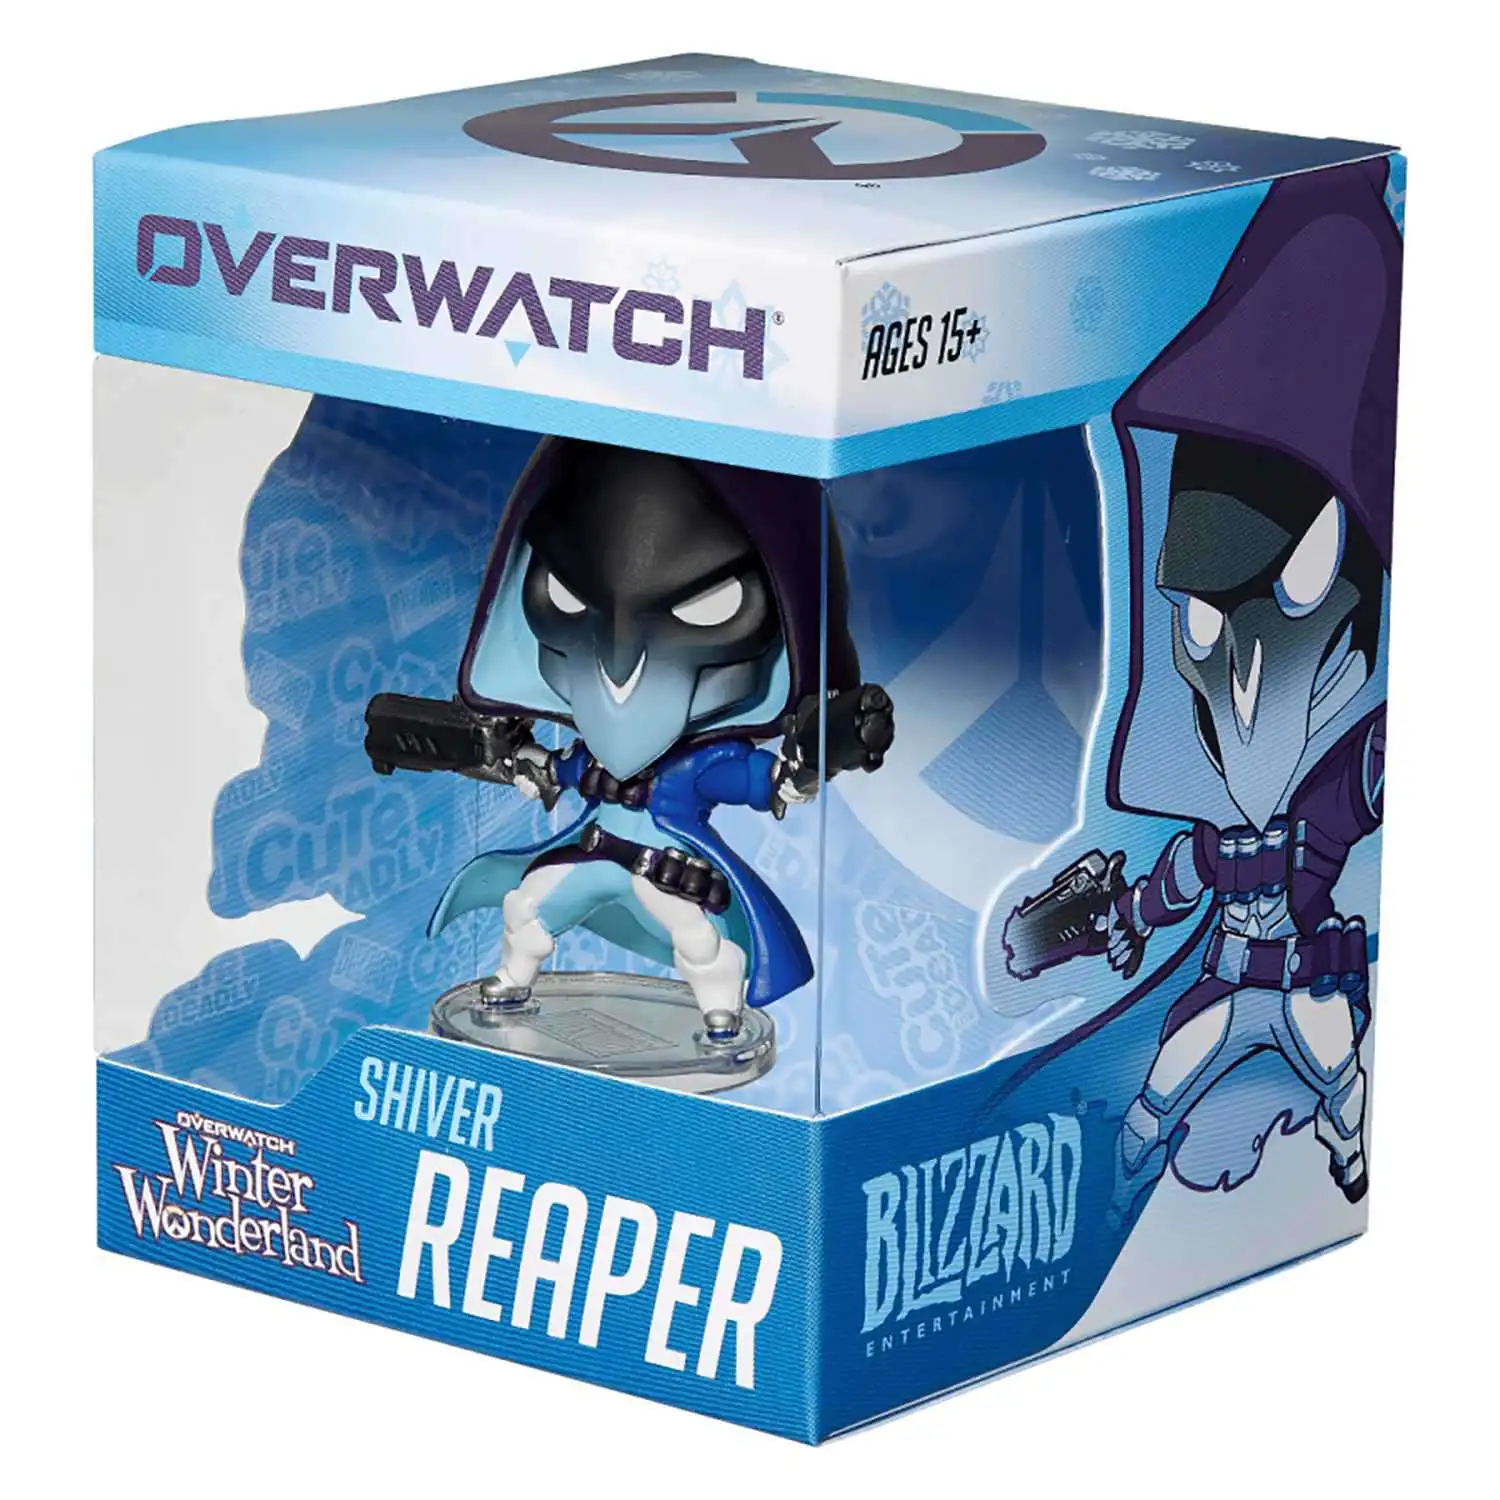 CUTE overwatch BLIZZARD BLIZZCON characters mini PVC figures toys loose 12 type 